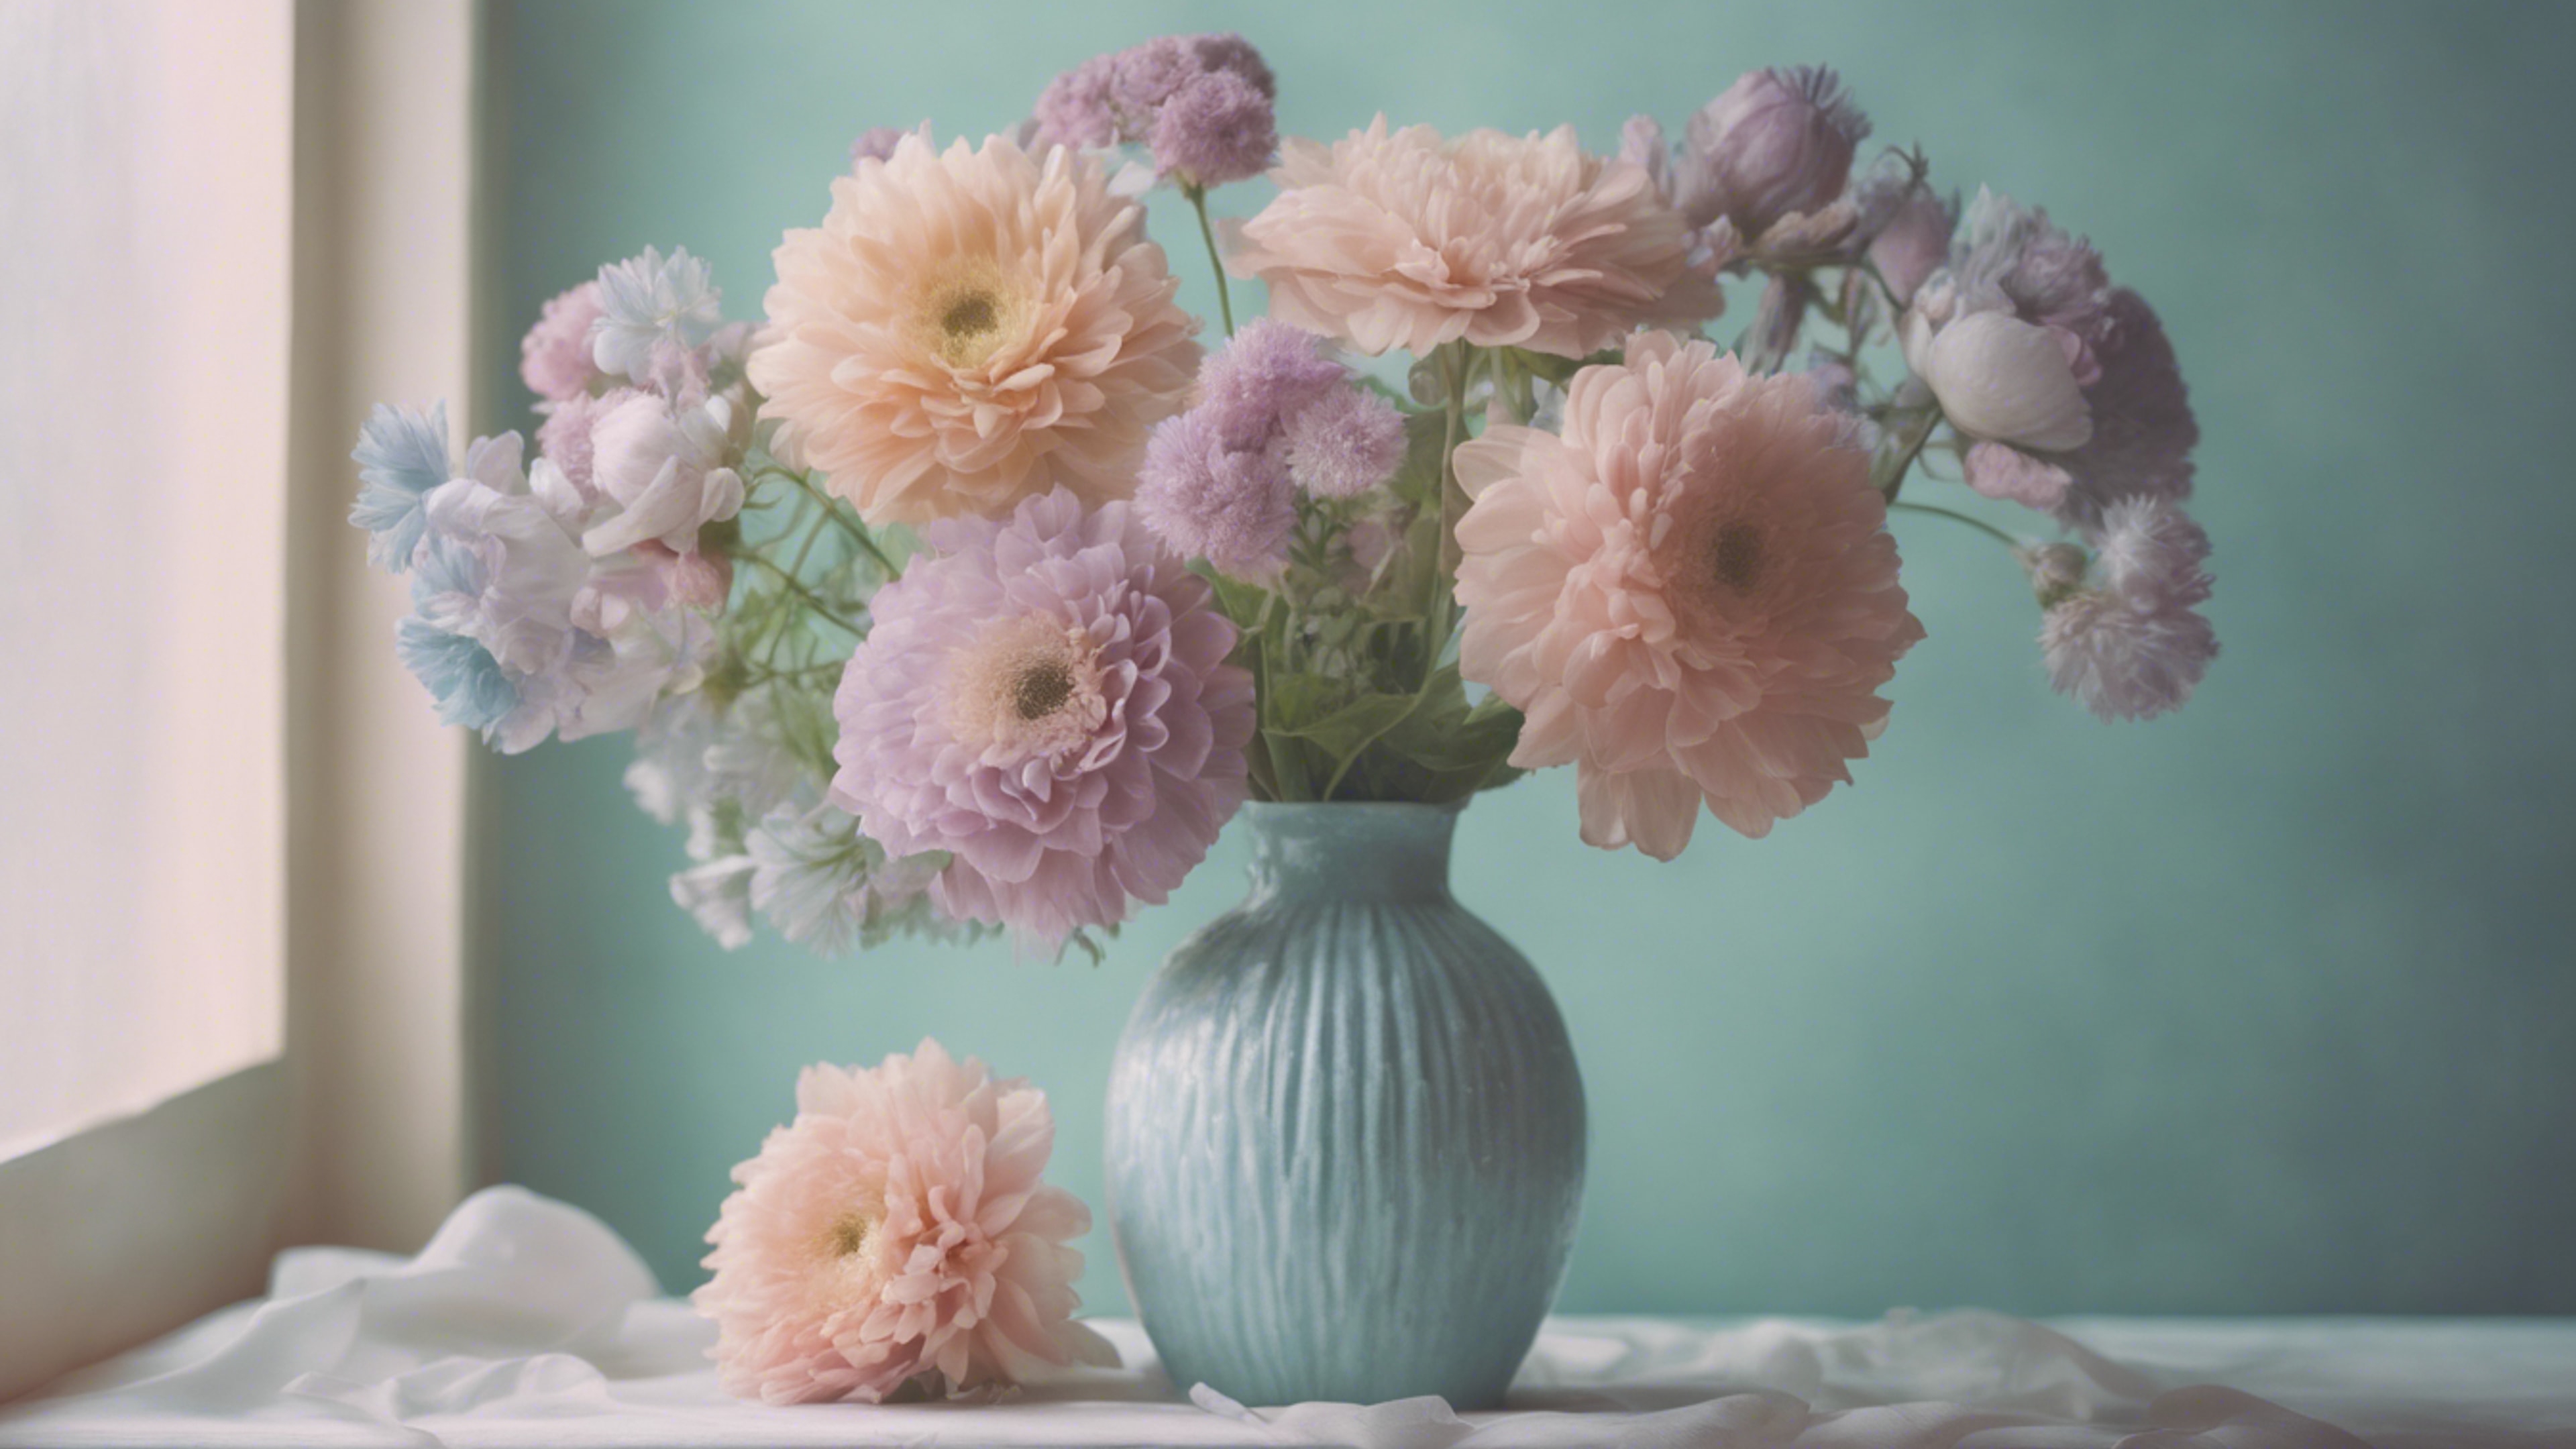 A pastel toned still-life painting featuring cool pastel colored flowers in a vase. Tapet[6e1327f815a34bc2b32b]